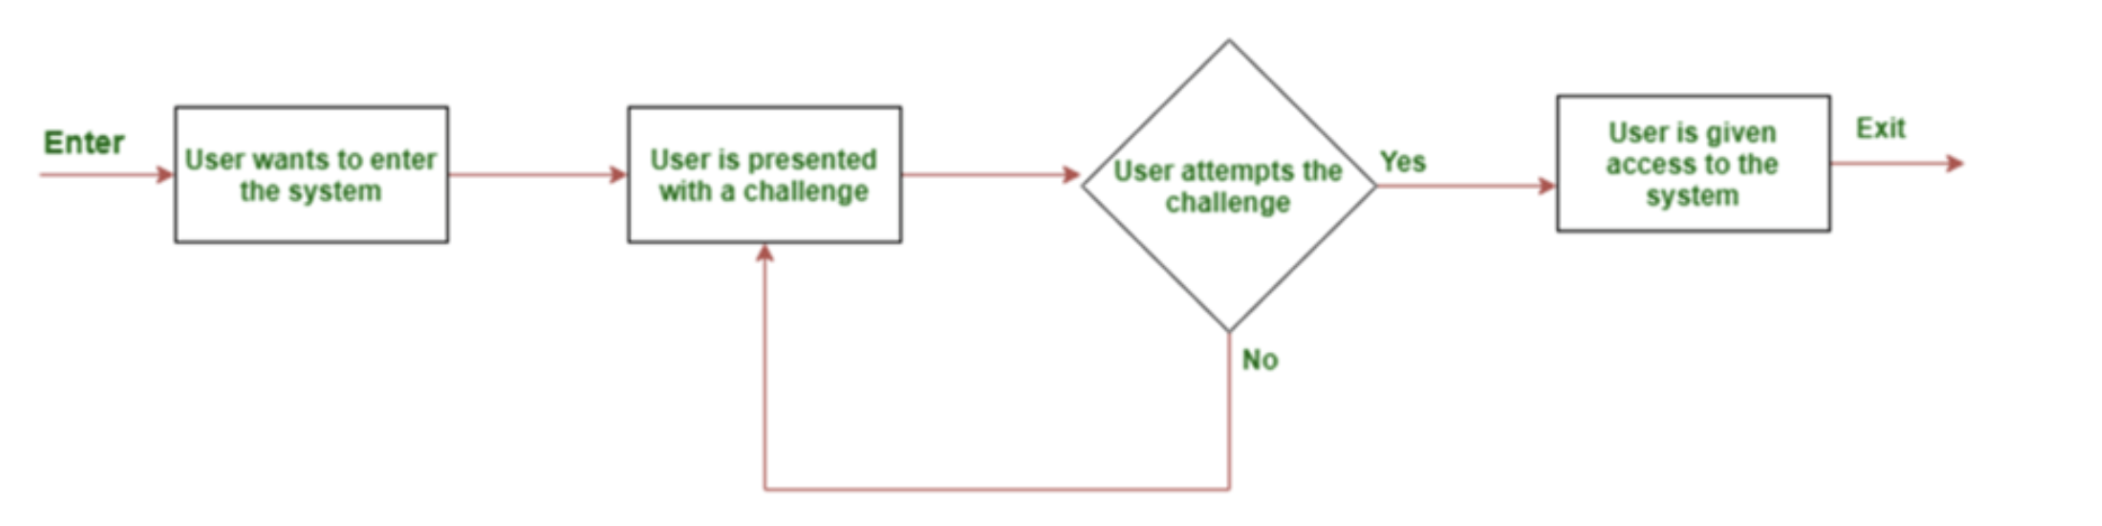 Image of the path users take when encountering challenges 